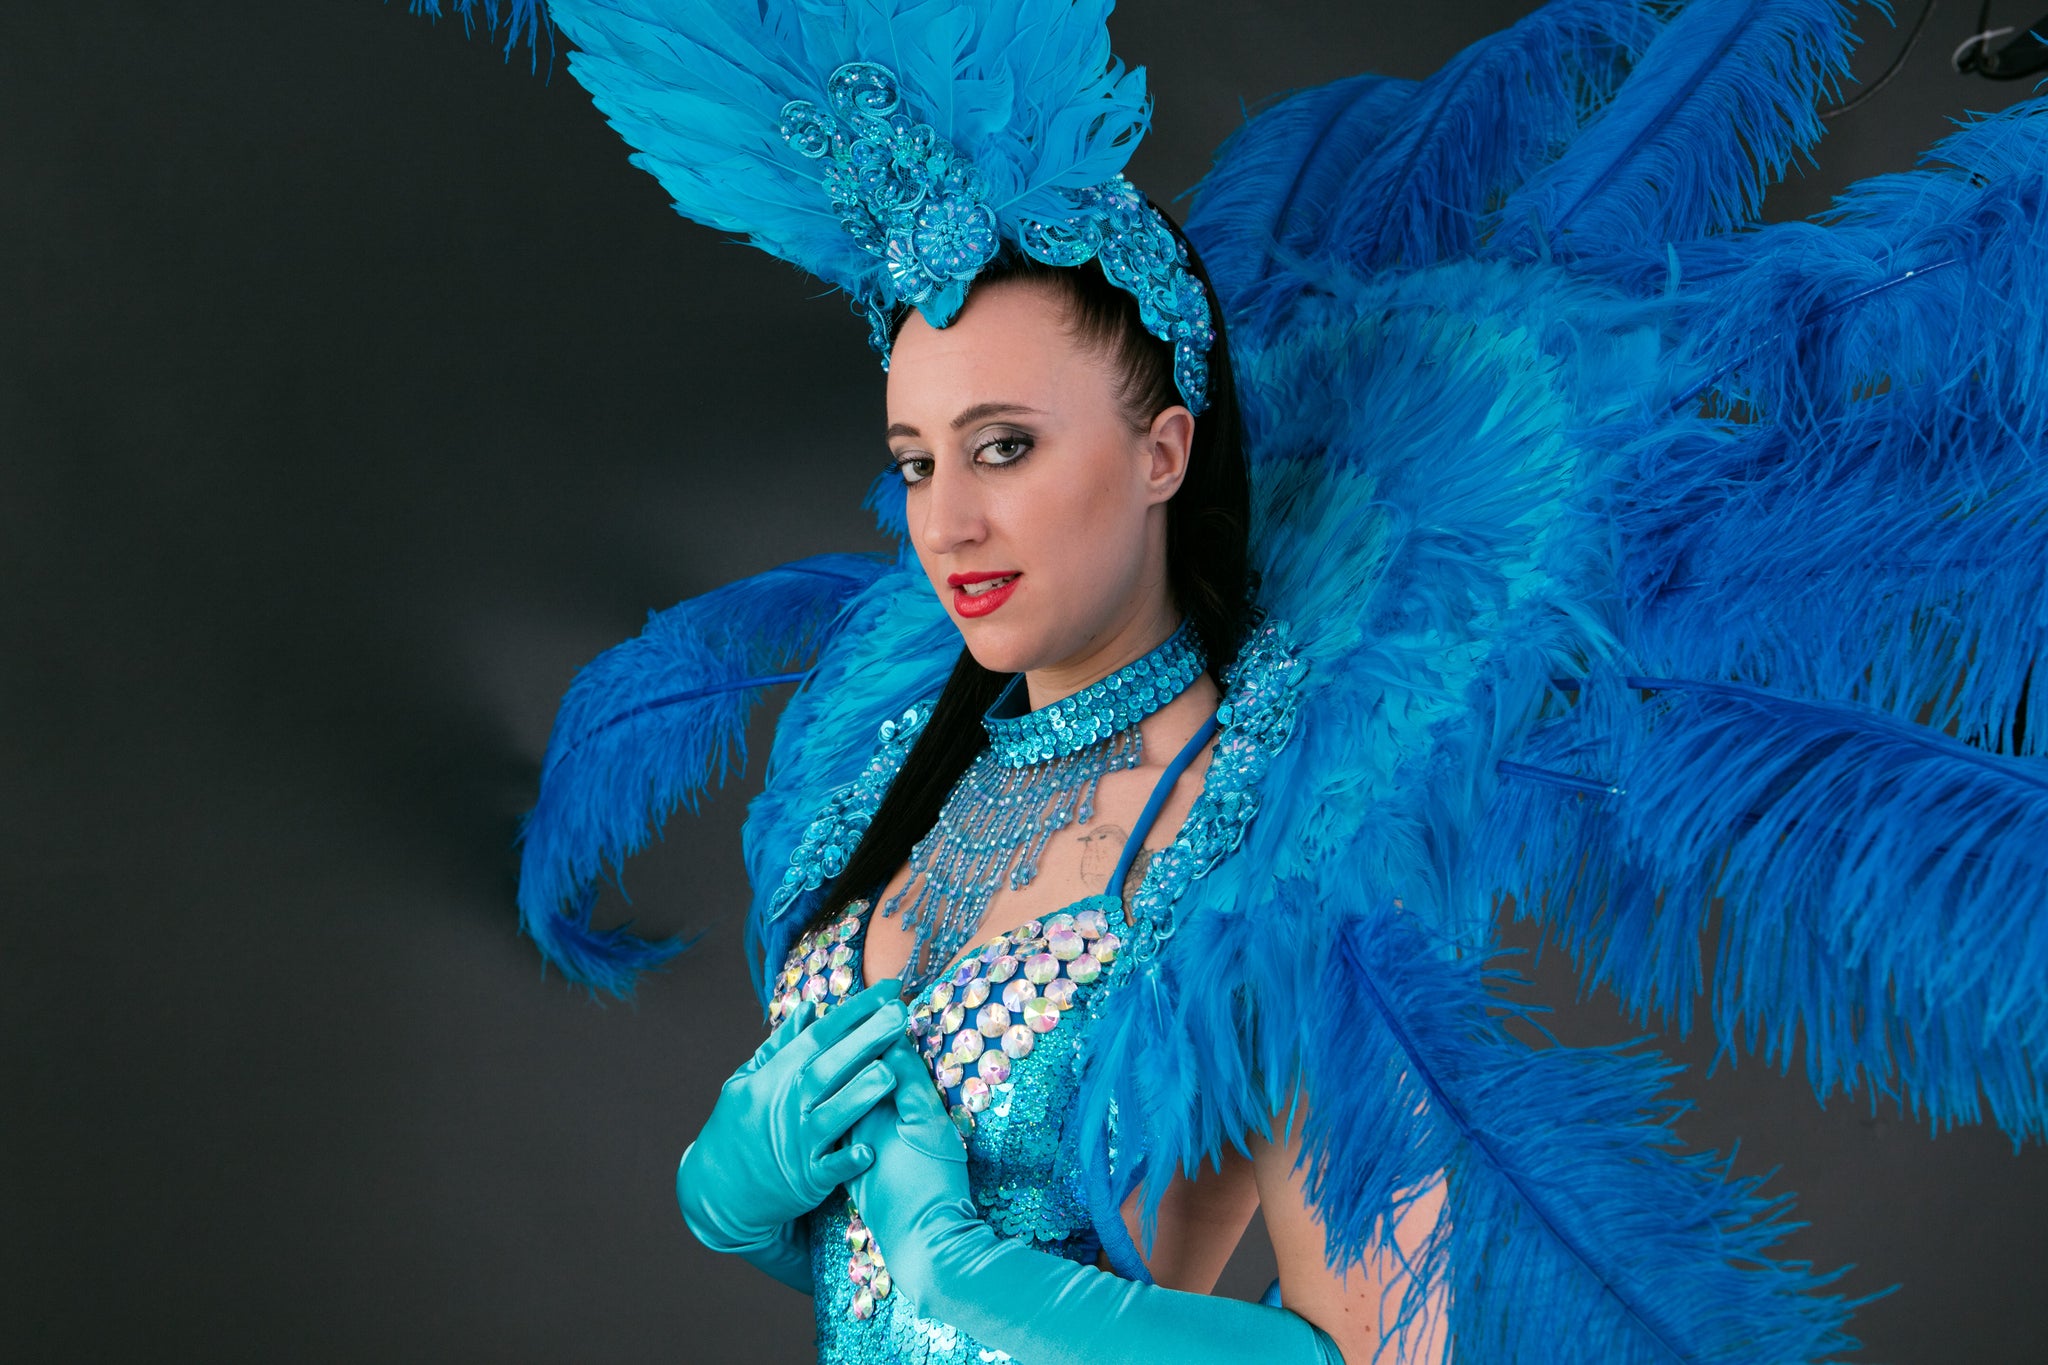 Blue Notting Hill Carnival Dancer Costume Hire Showgirls Outfits Rent Blue sizes 6 - 16 SALE